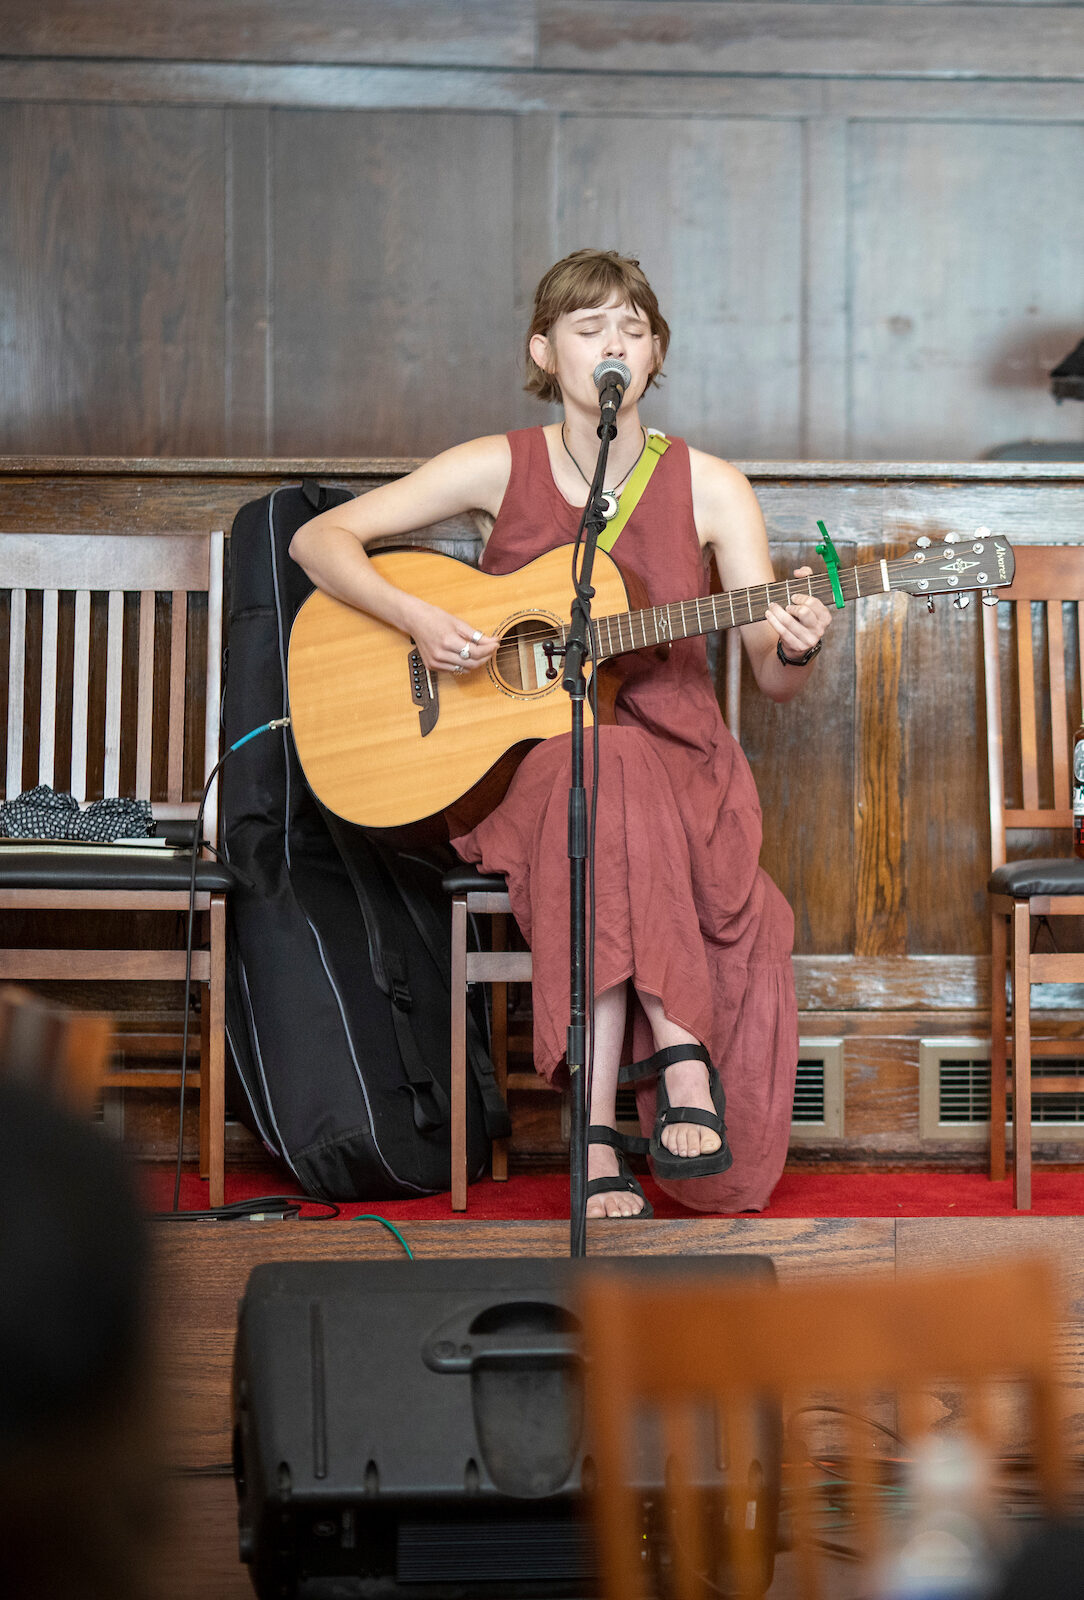 A woman sits on a wooden stage with a guitar in her arms as she sings into a stand microphone.